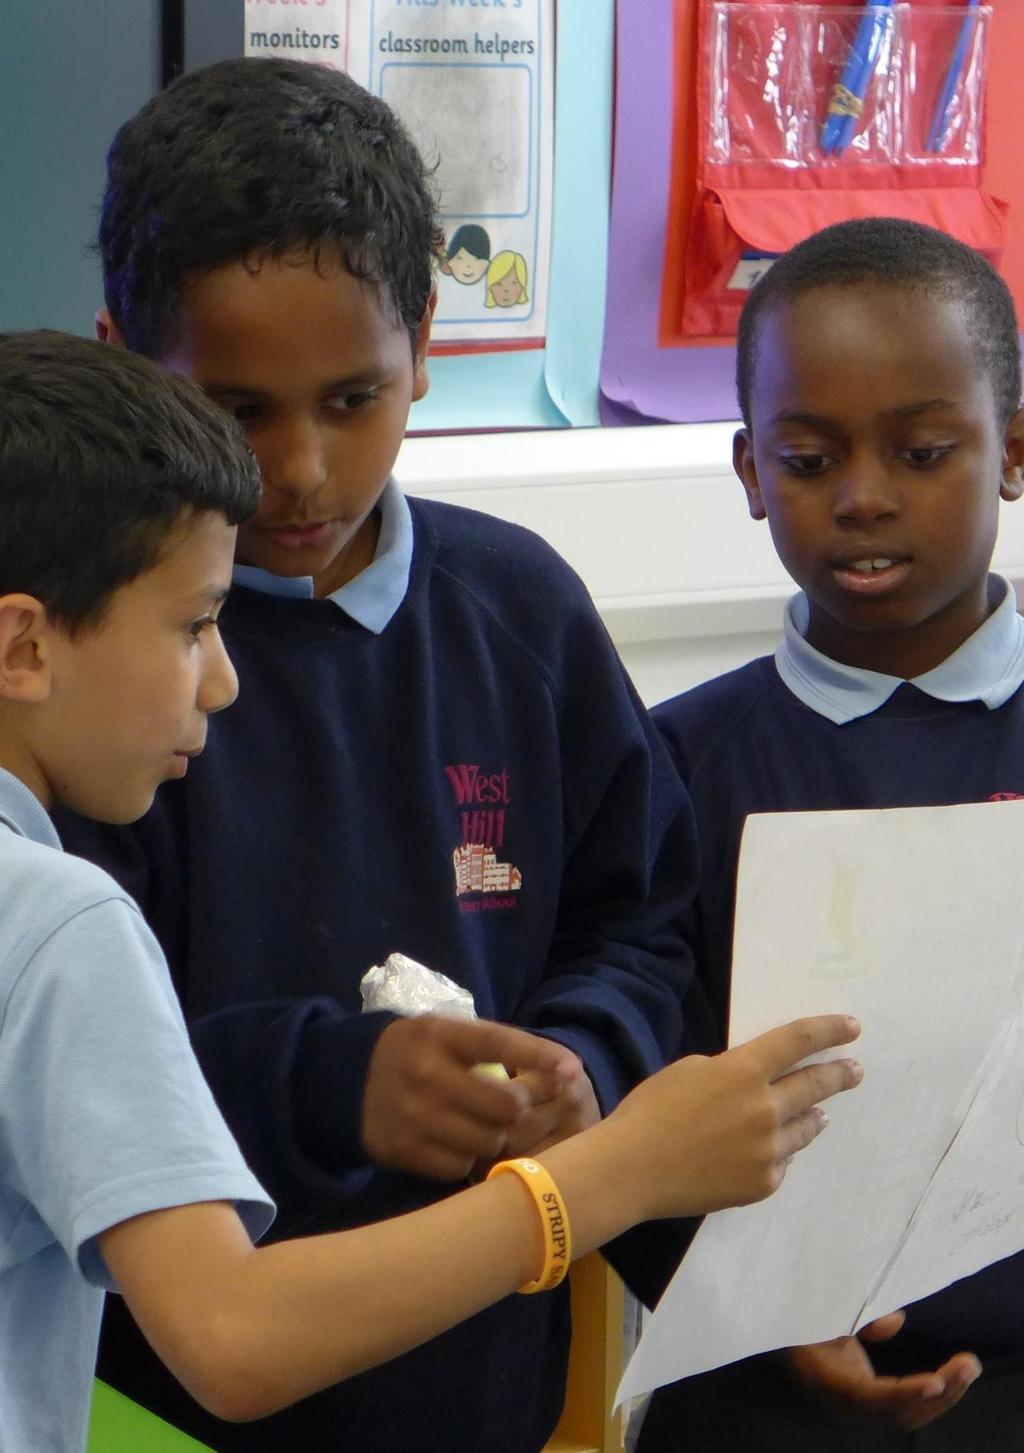 "The value of the programme for us has been helping the children see how by